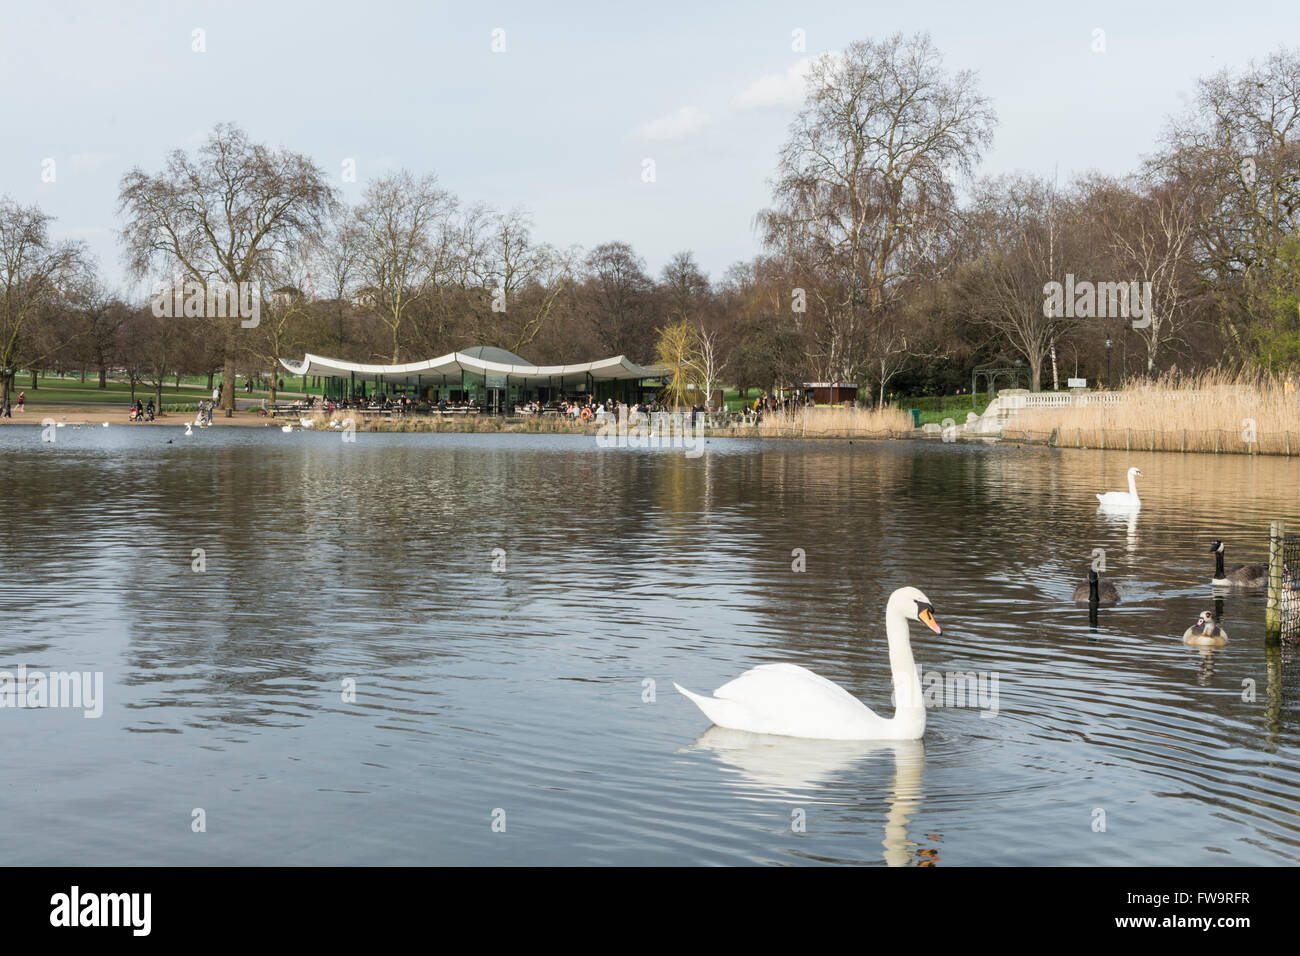 The Dell Cafe by The Serpentine in Hyde Park, City of Westminster, Greater London, England, United Kingdom Stock Photo